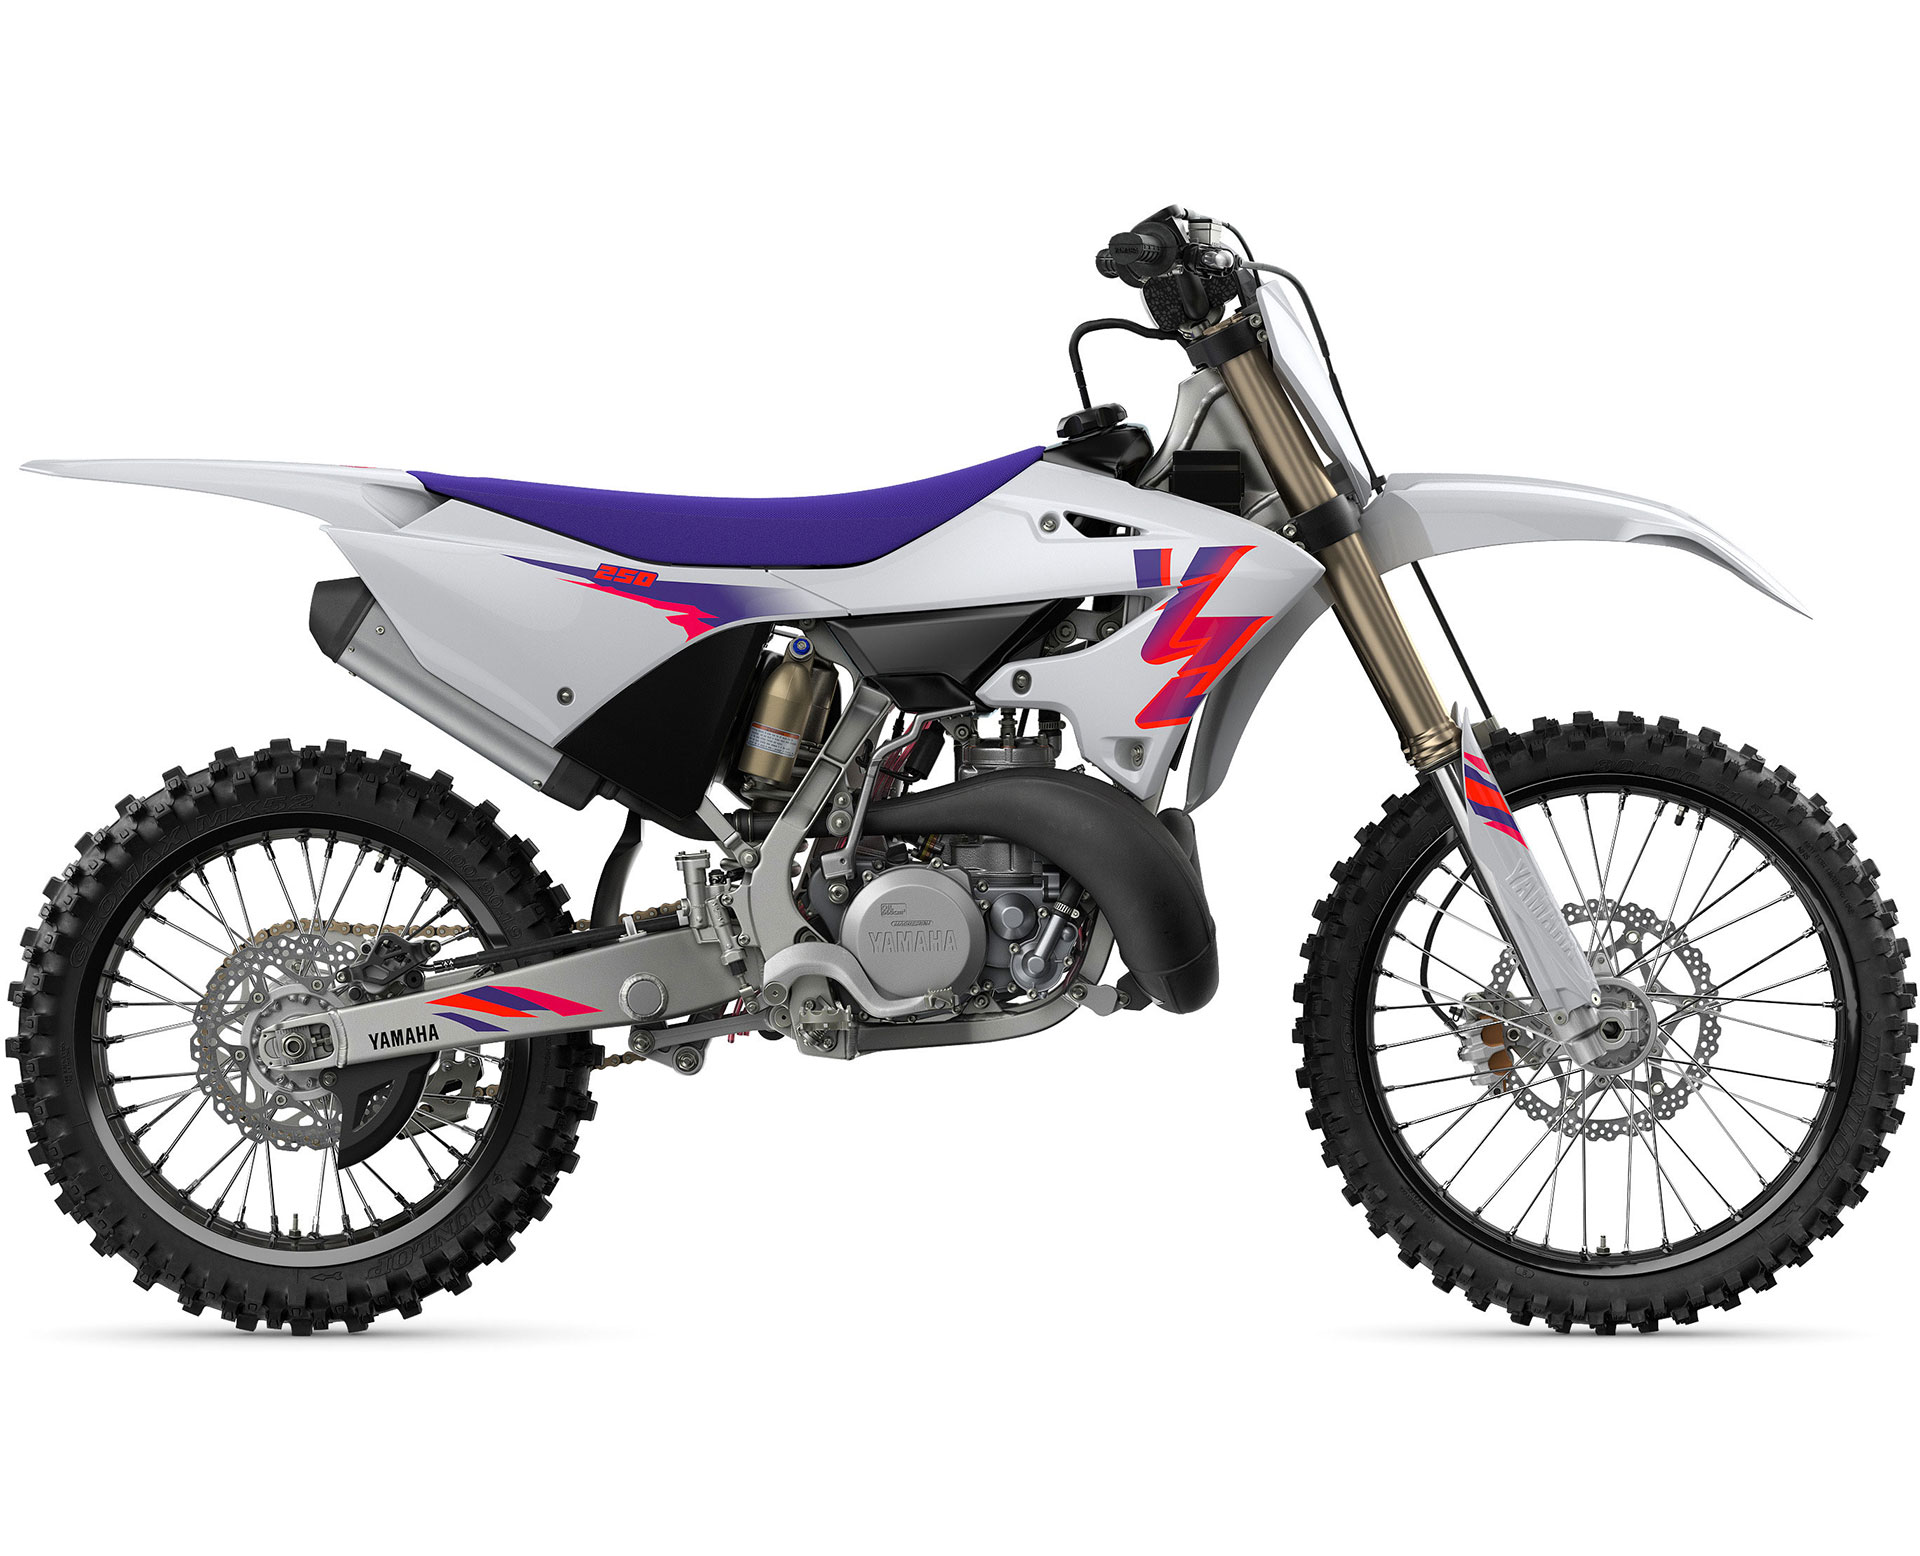 Thumbnail of your customized YZ250 2024